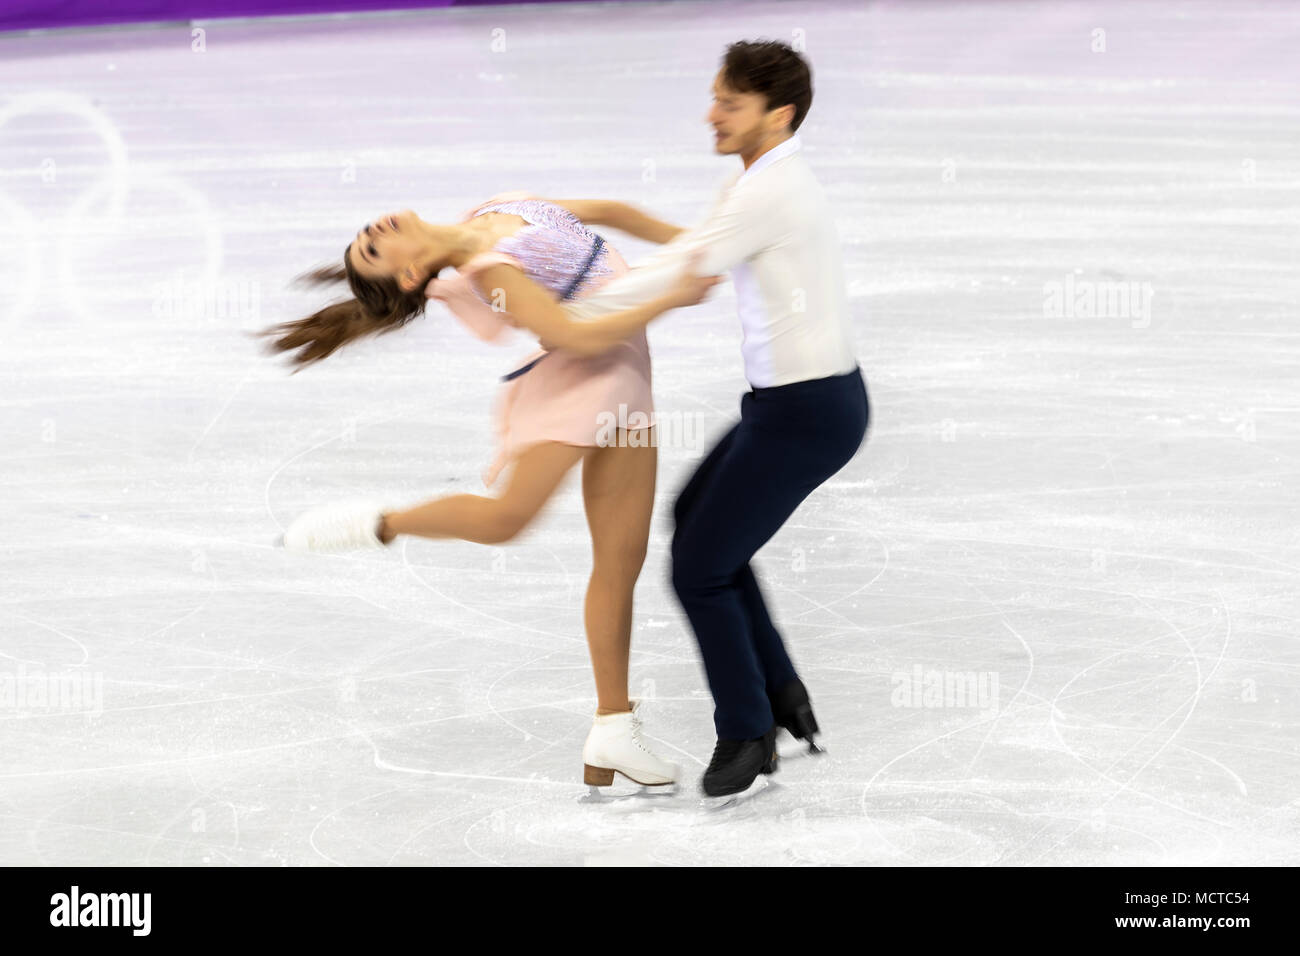 Motion blur action of Kavita Lorenz/Joti Polizoakis (GER) in the Figure Skating - Ice Dance Free at the Olympic Winter Games PyeongChang 2018 Stock Photo